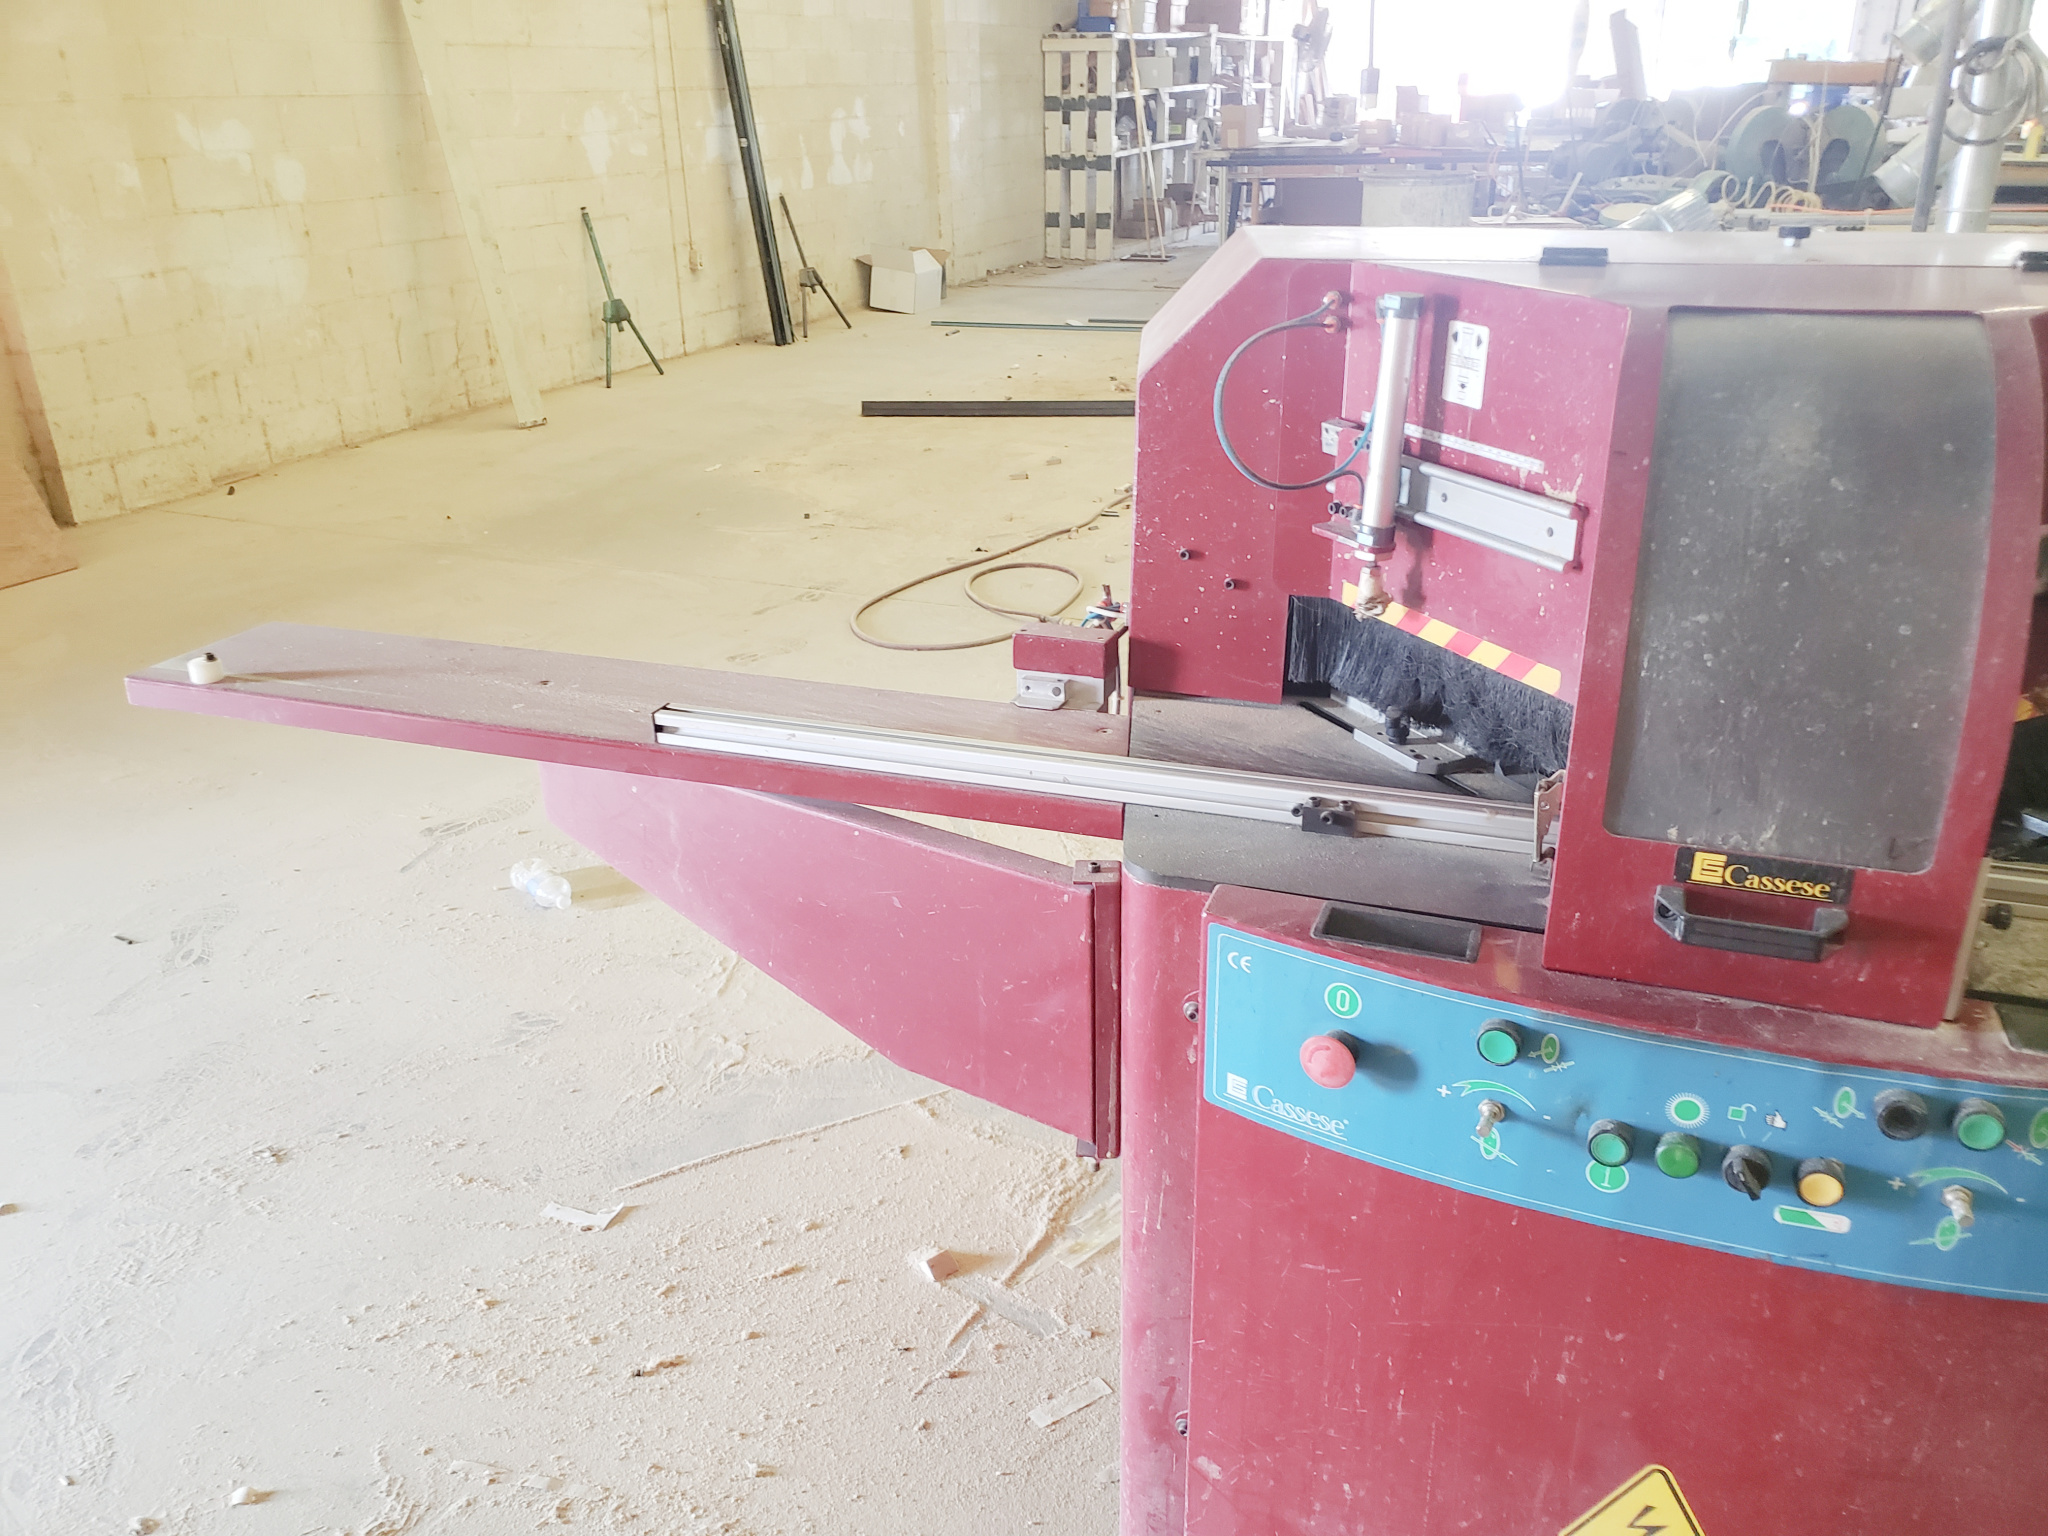 Equipment Lot: Cassese CS969 Double Miter Saw, Pistorius MN-200 Double Miter Saw, Inglet Verdi Basic 96″ Panel Saw, & Curtis 10HP Compressors (Used) Item # UE-101422D